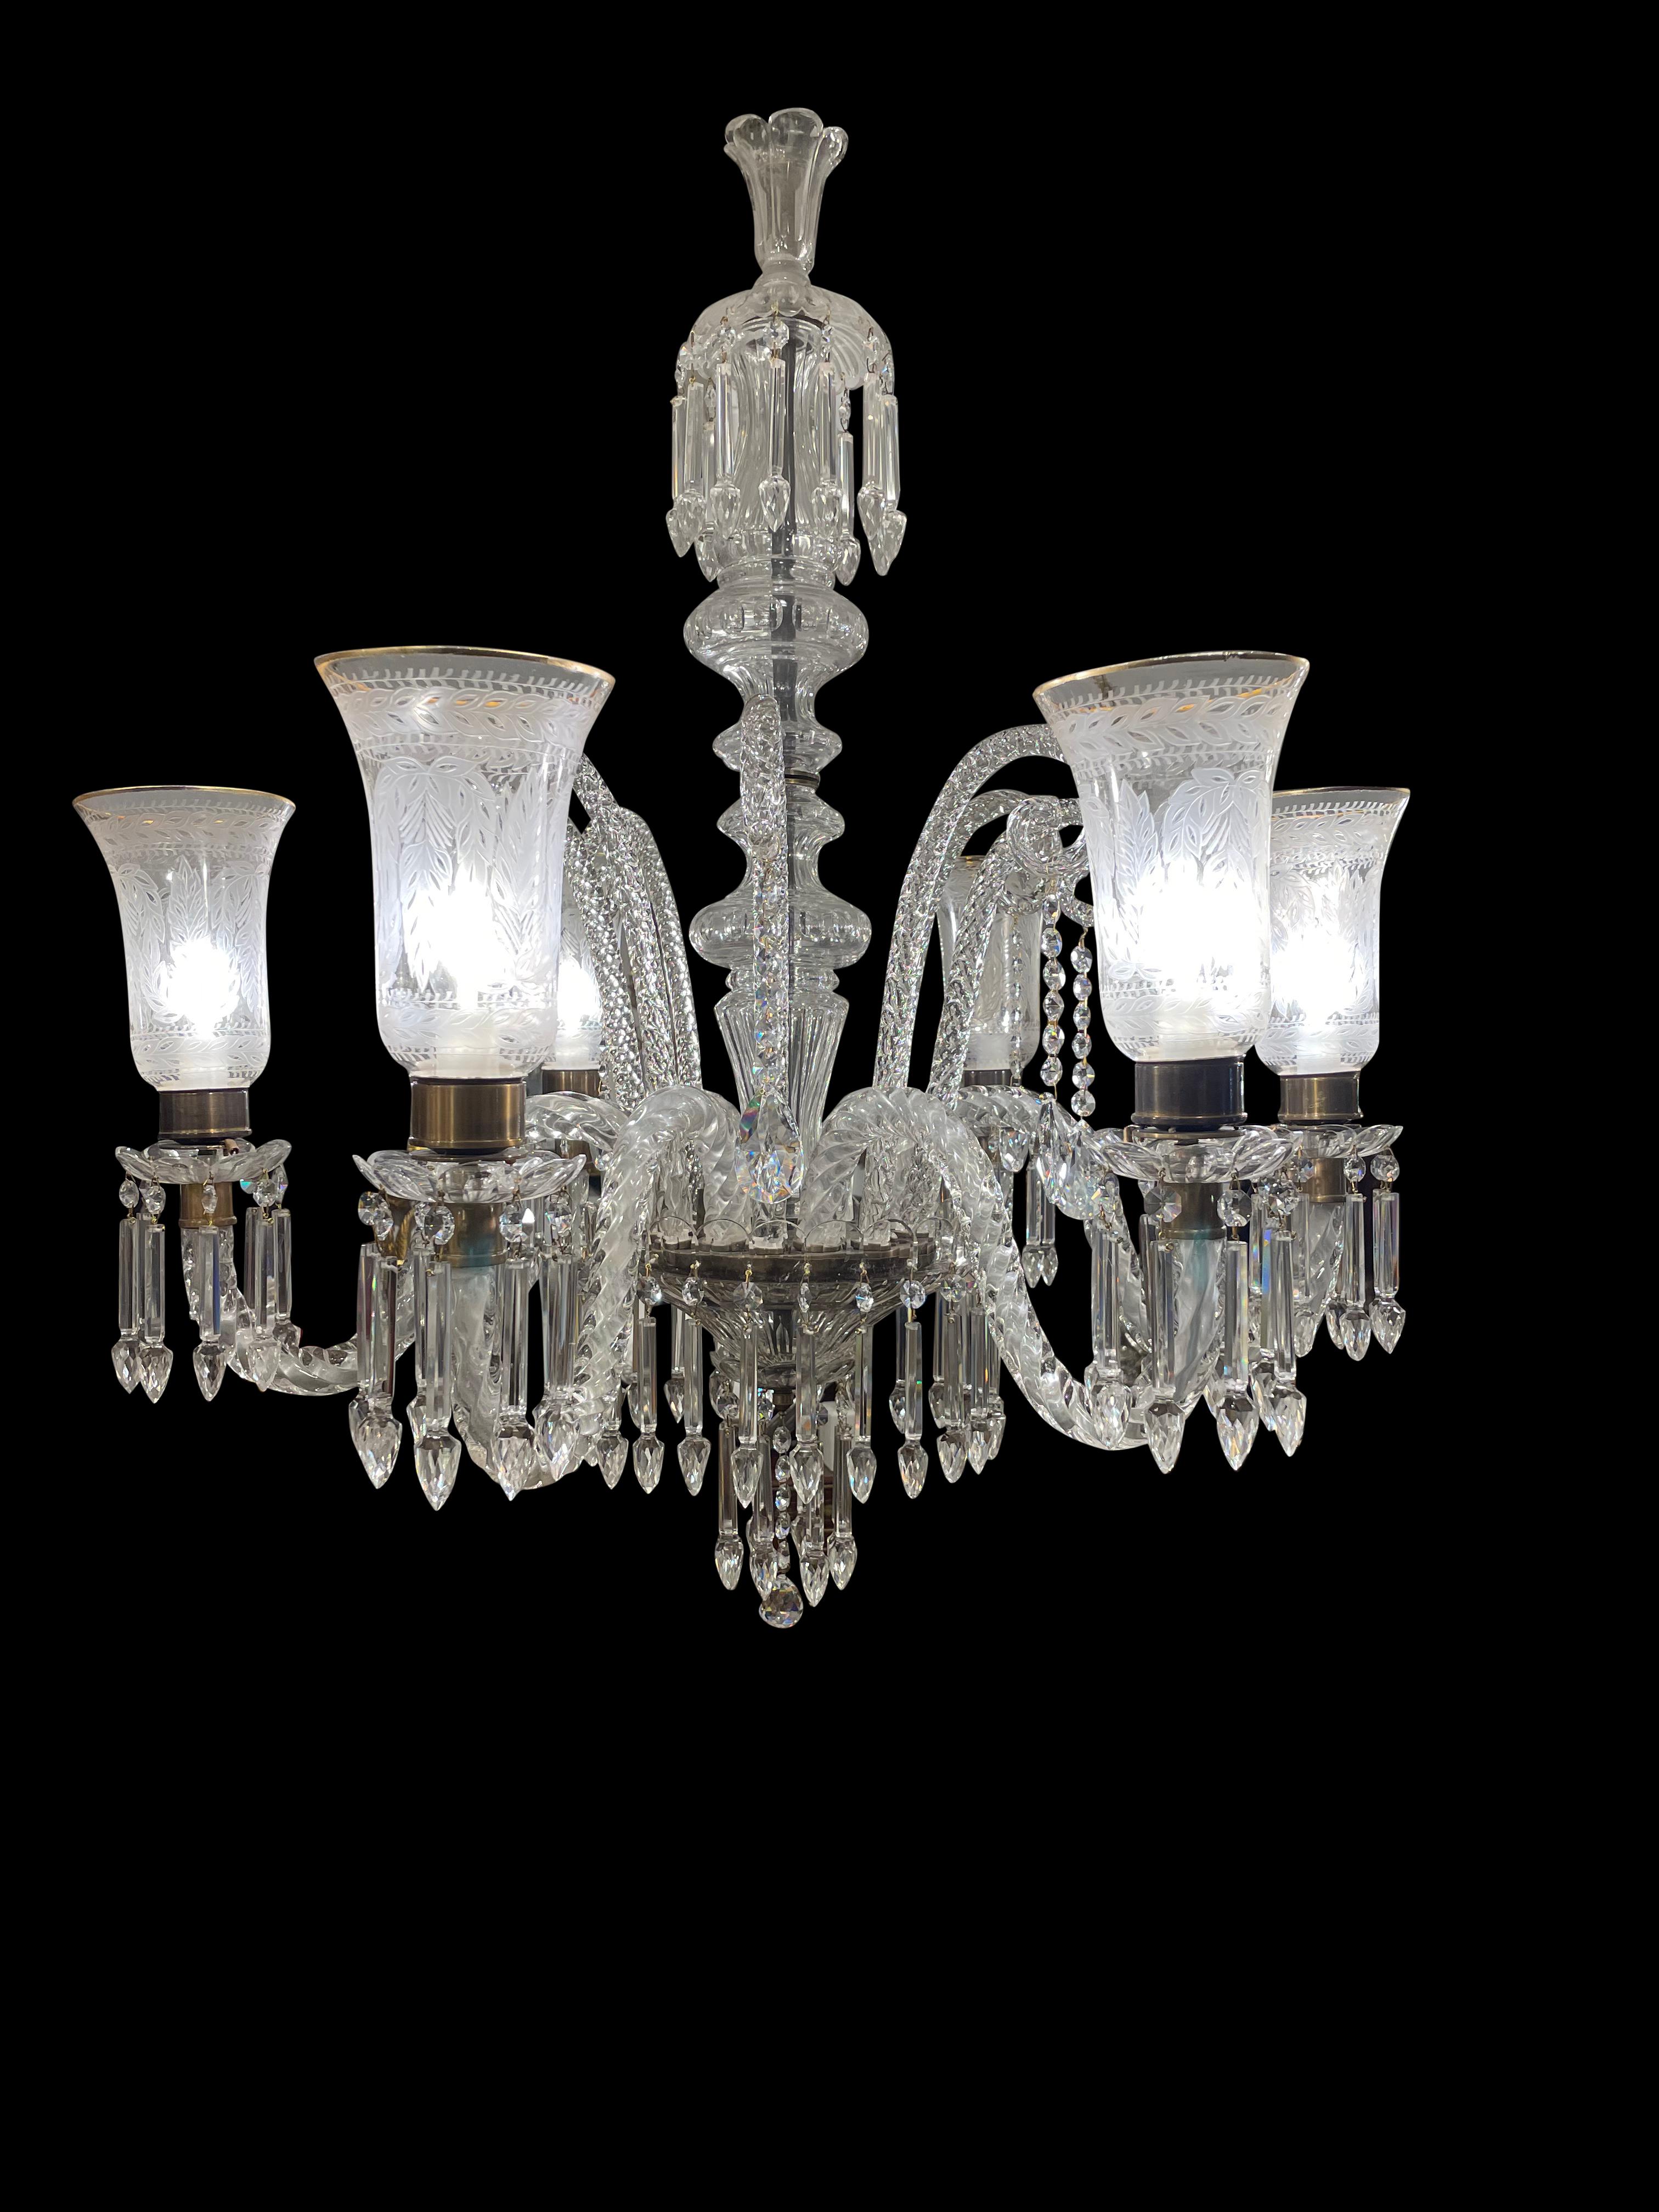 European Cut Crystal Chandelier with Engraved Hurricane Shades, 20th Century For Sale